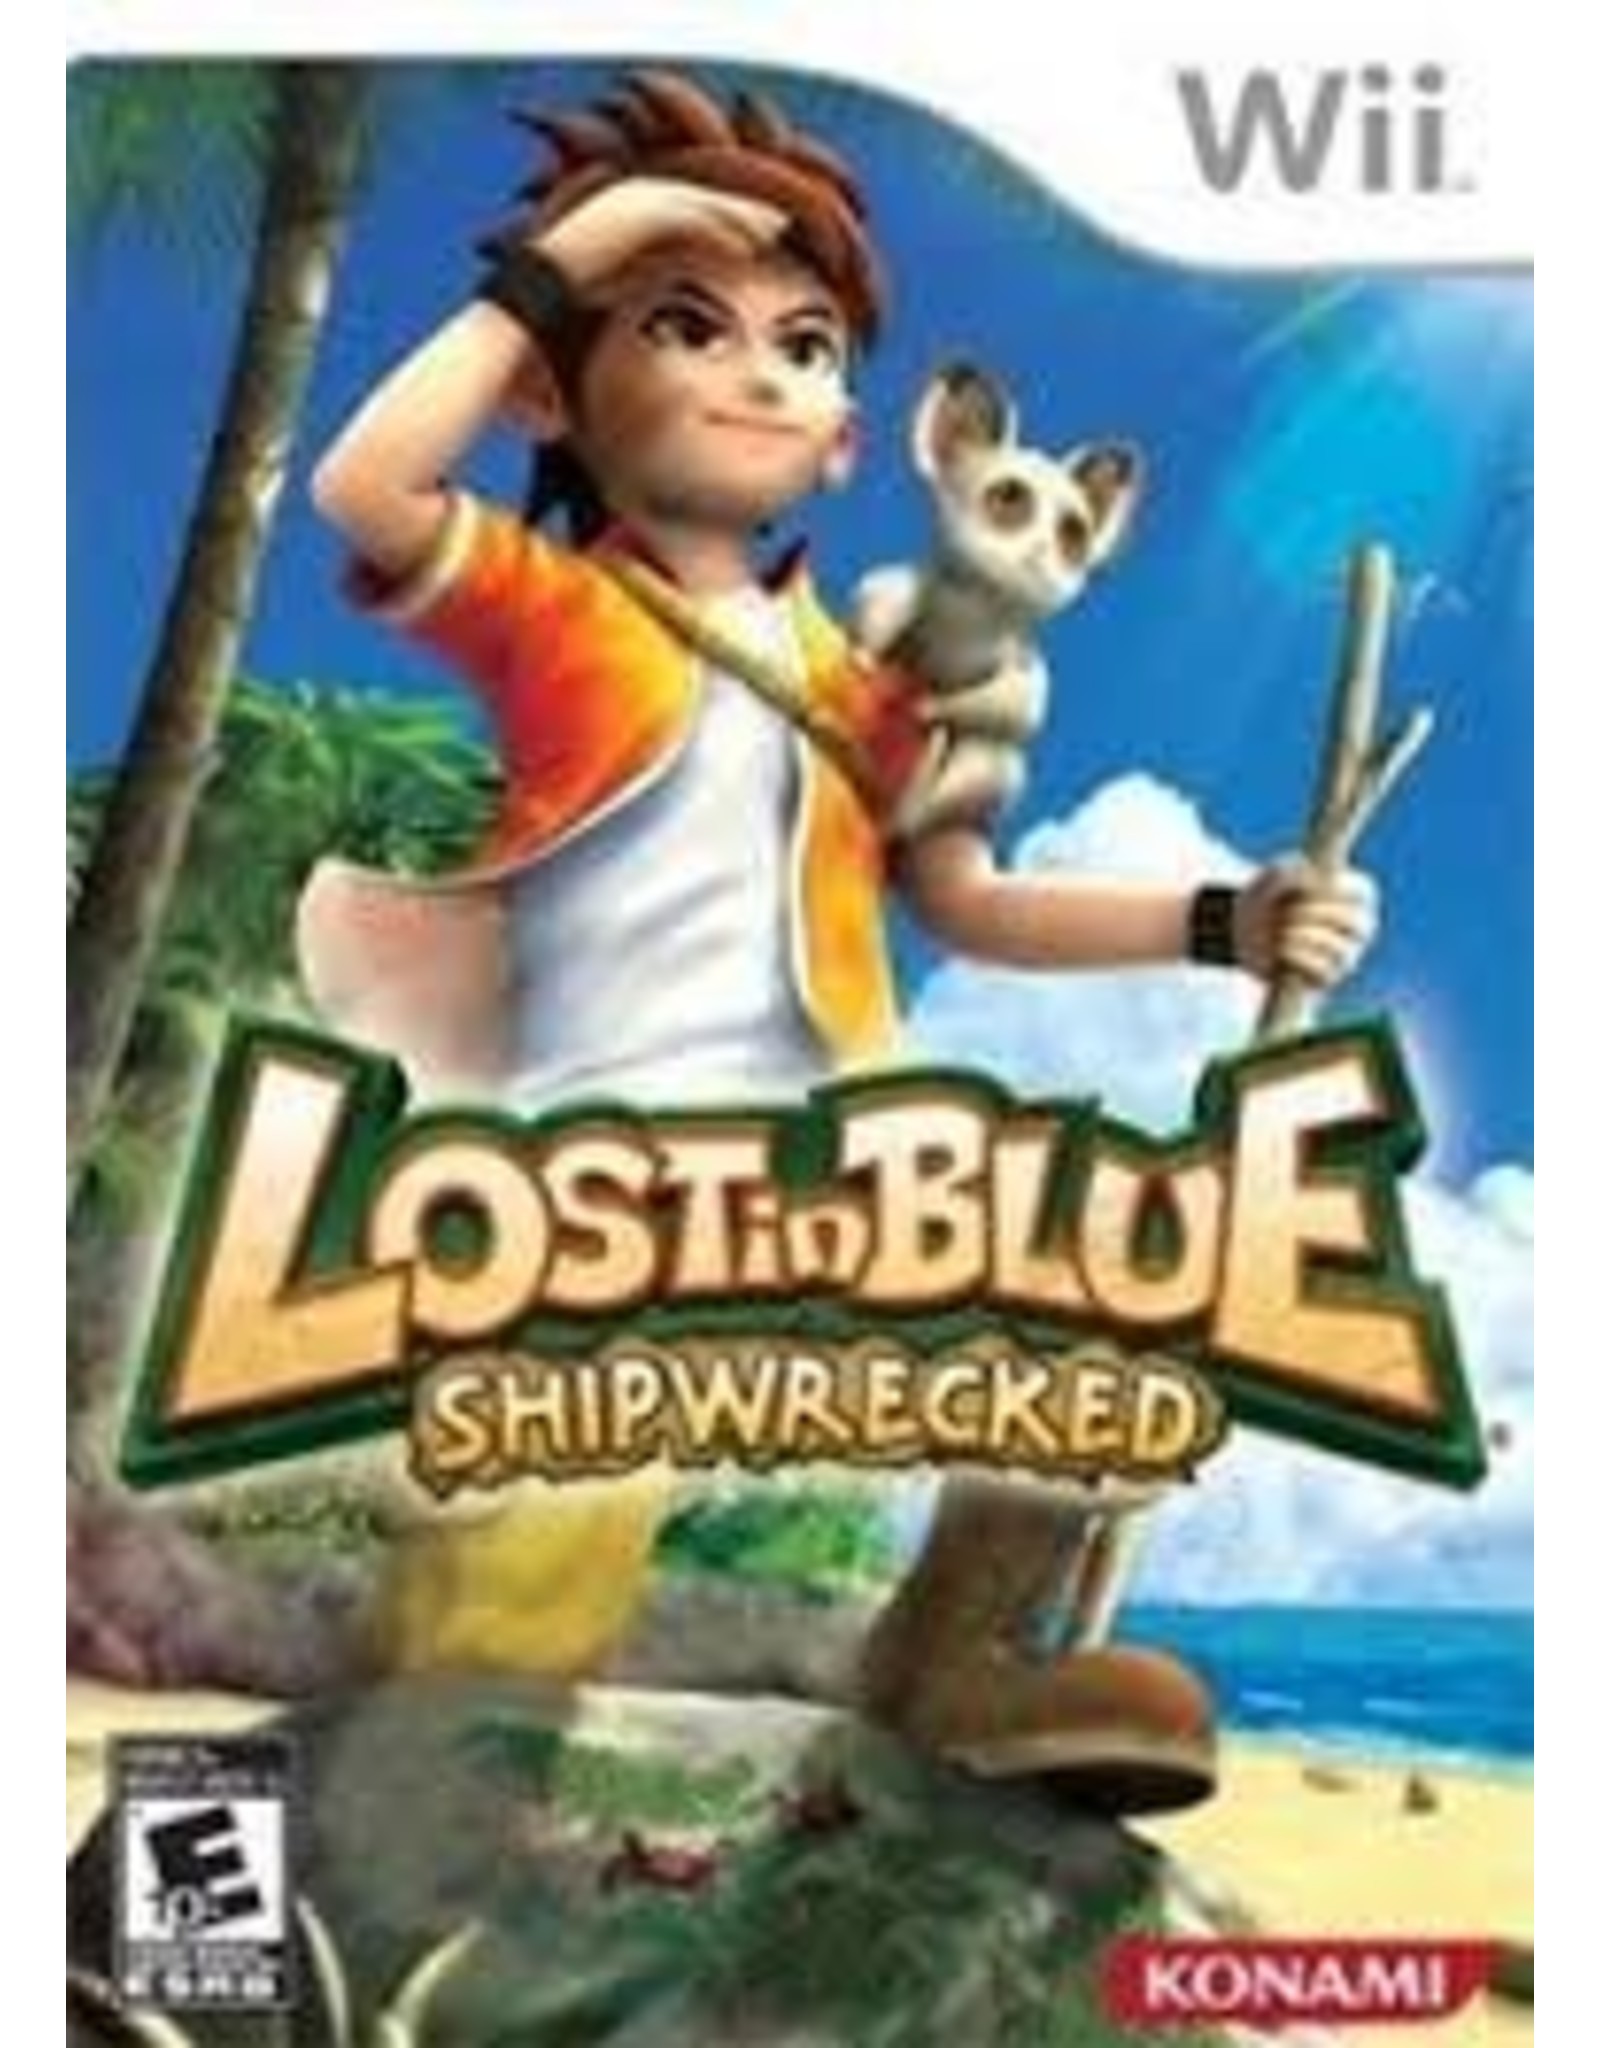 Wii Lost in Blue Shipwrecked (No Manual)